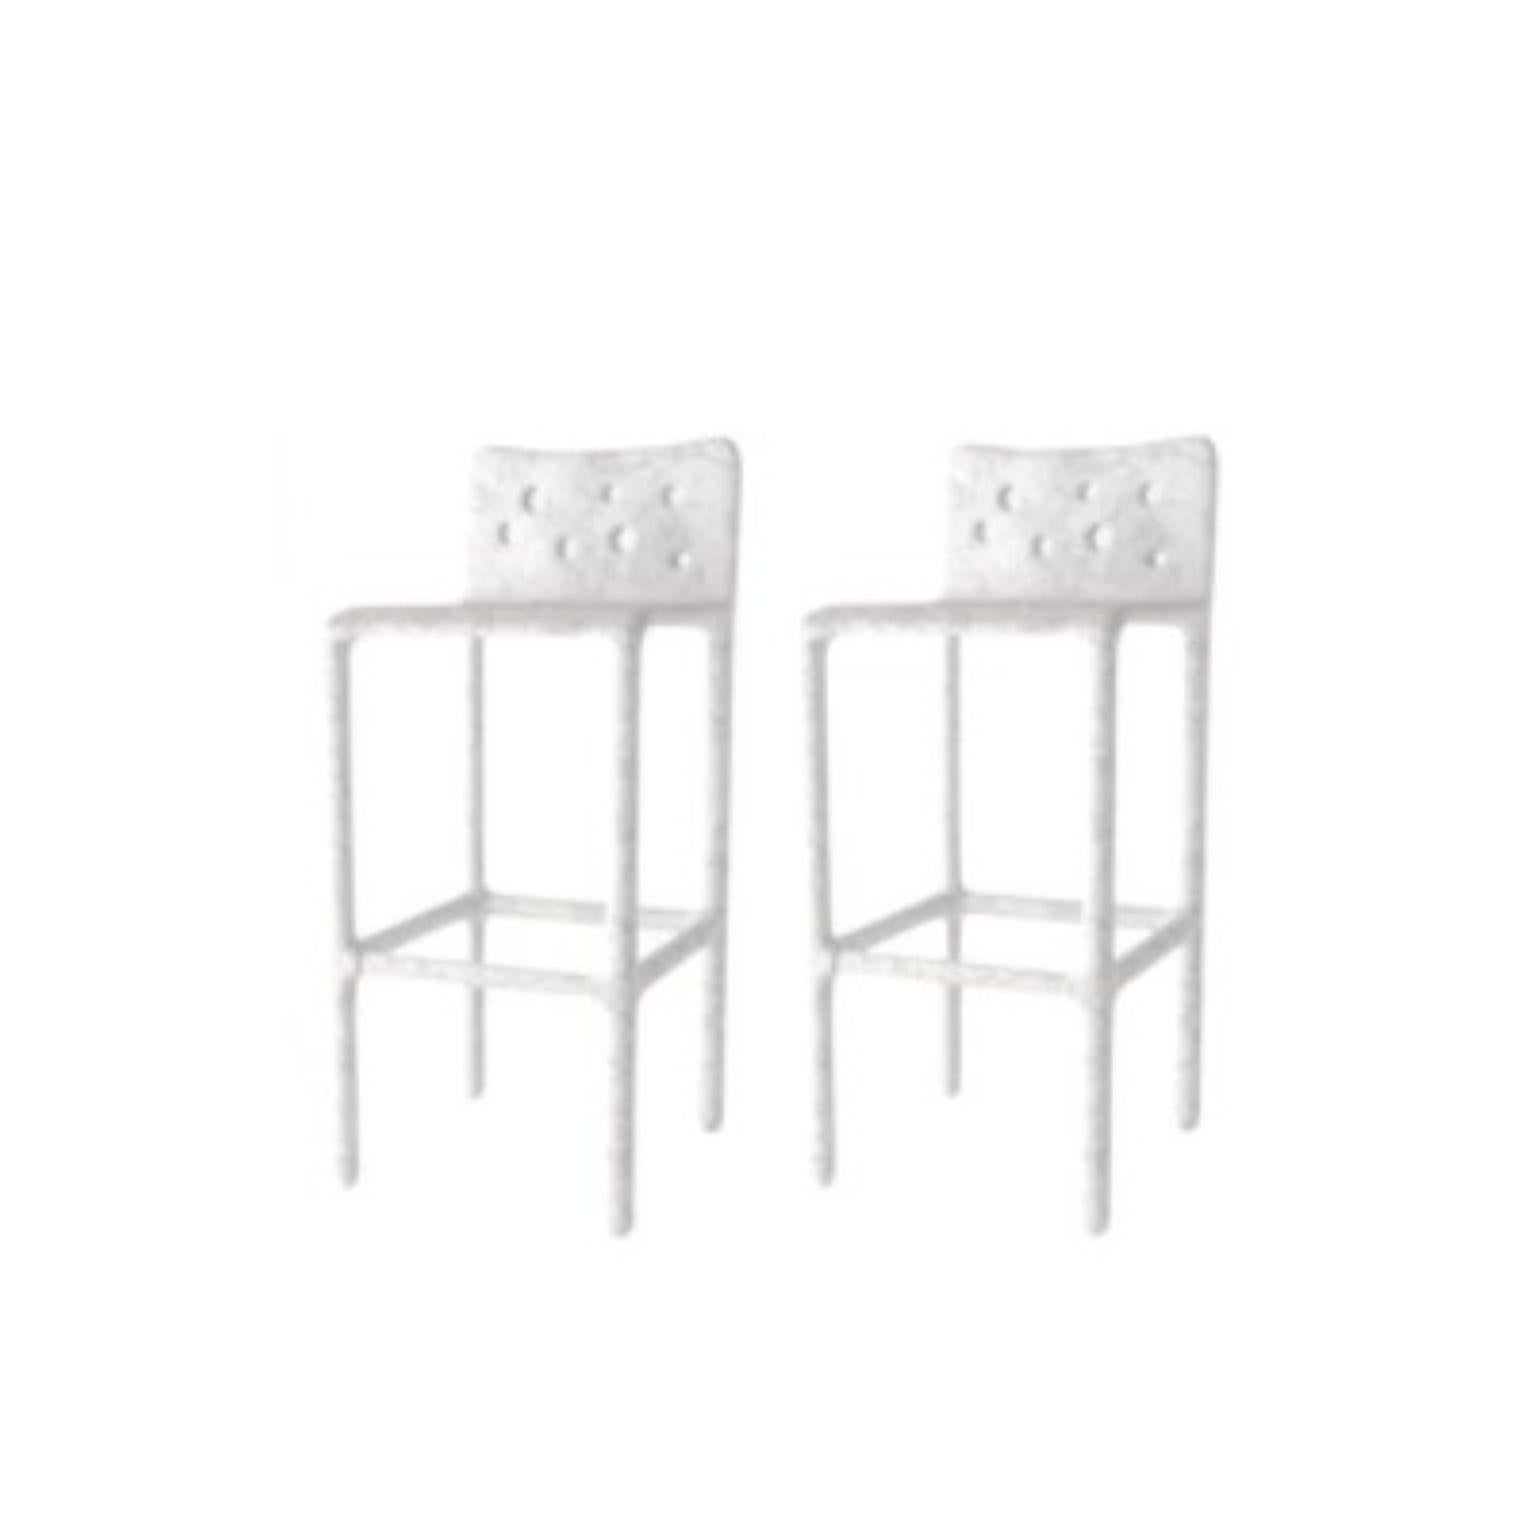 Set of 2 outdoor white sculpted contemporary chairs by Faina
Design: Victoriya Yakusha
Material: steel, flax rubber, biopolymer, cellulose
Dimensions: Height: 106 x Width: 45 x Sitting place width: 49 Legs height: 80 cm
Weight: 20